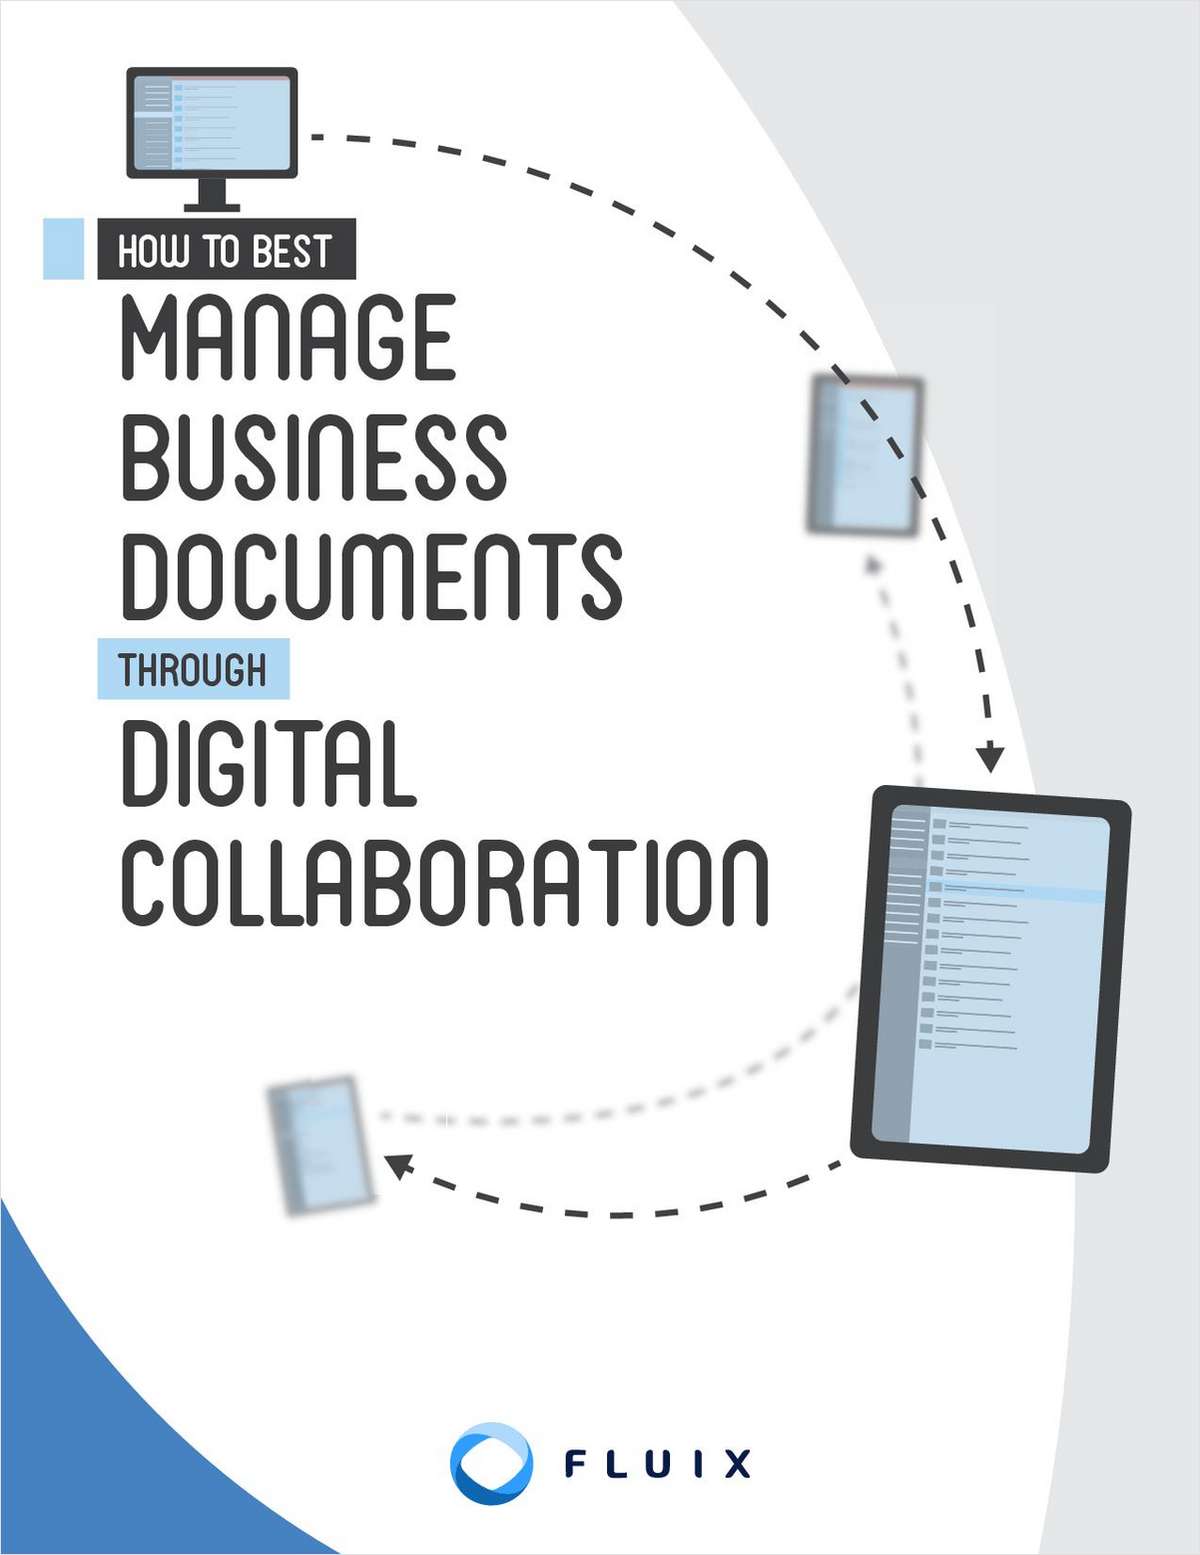 How to Best Manage Business Documents Through Digital Collaboration